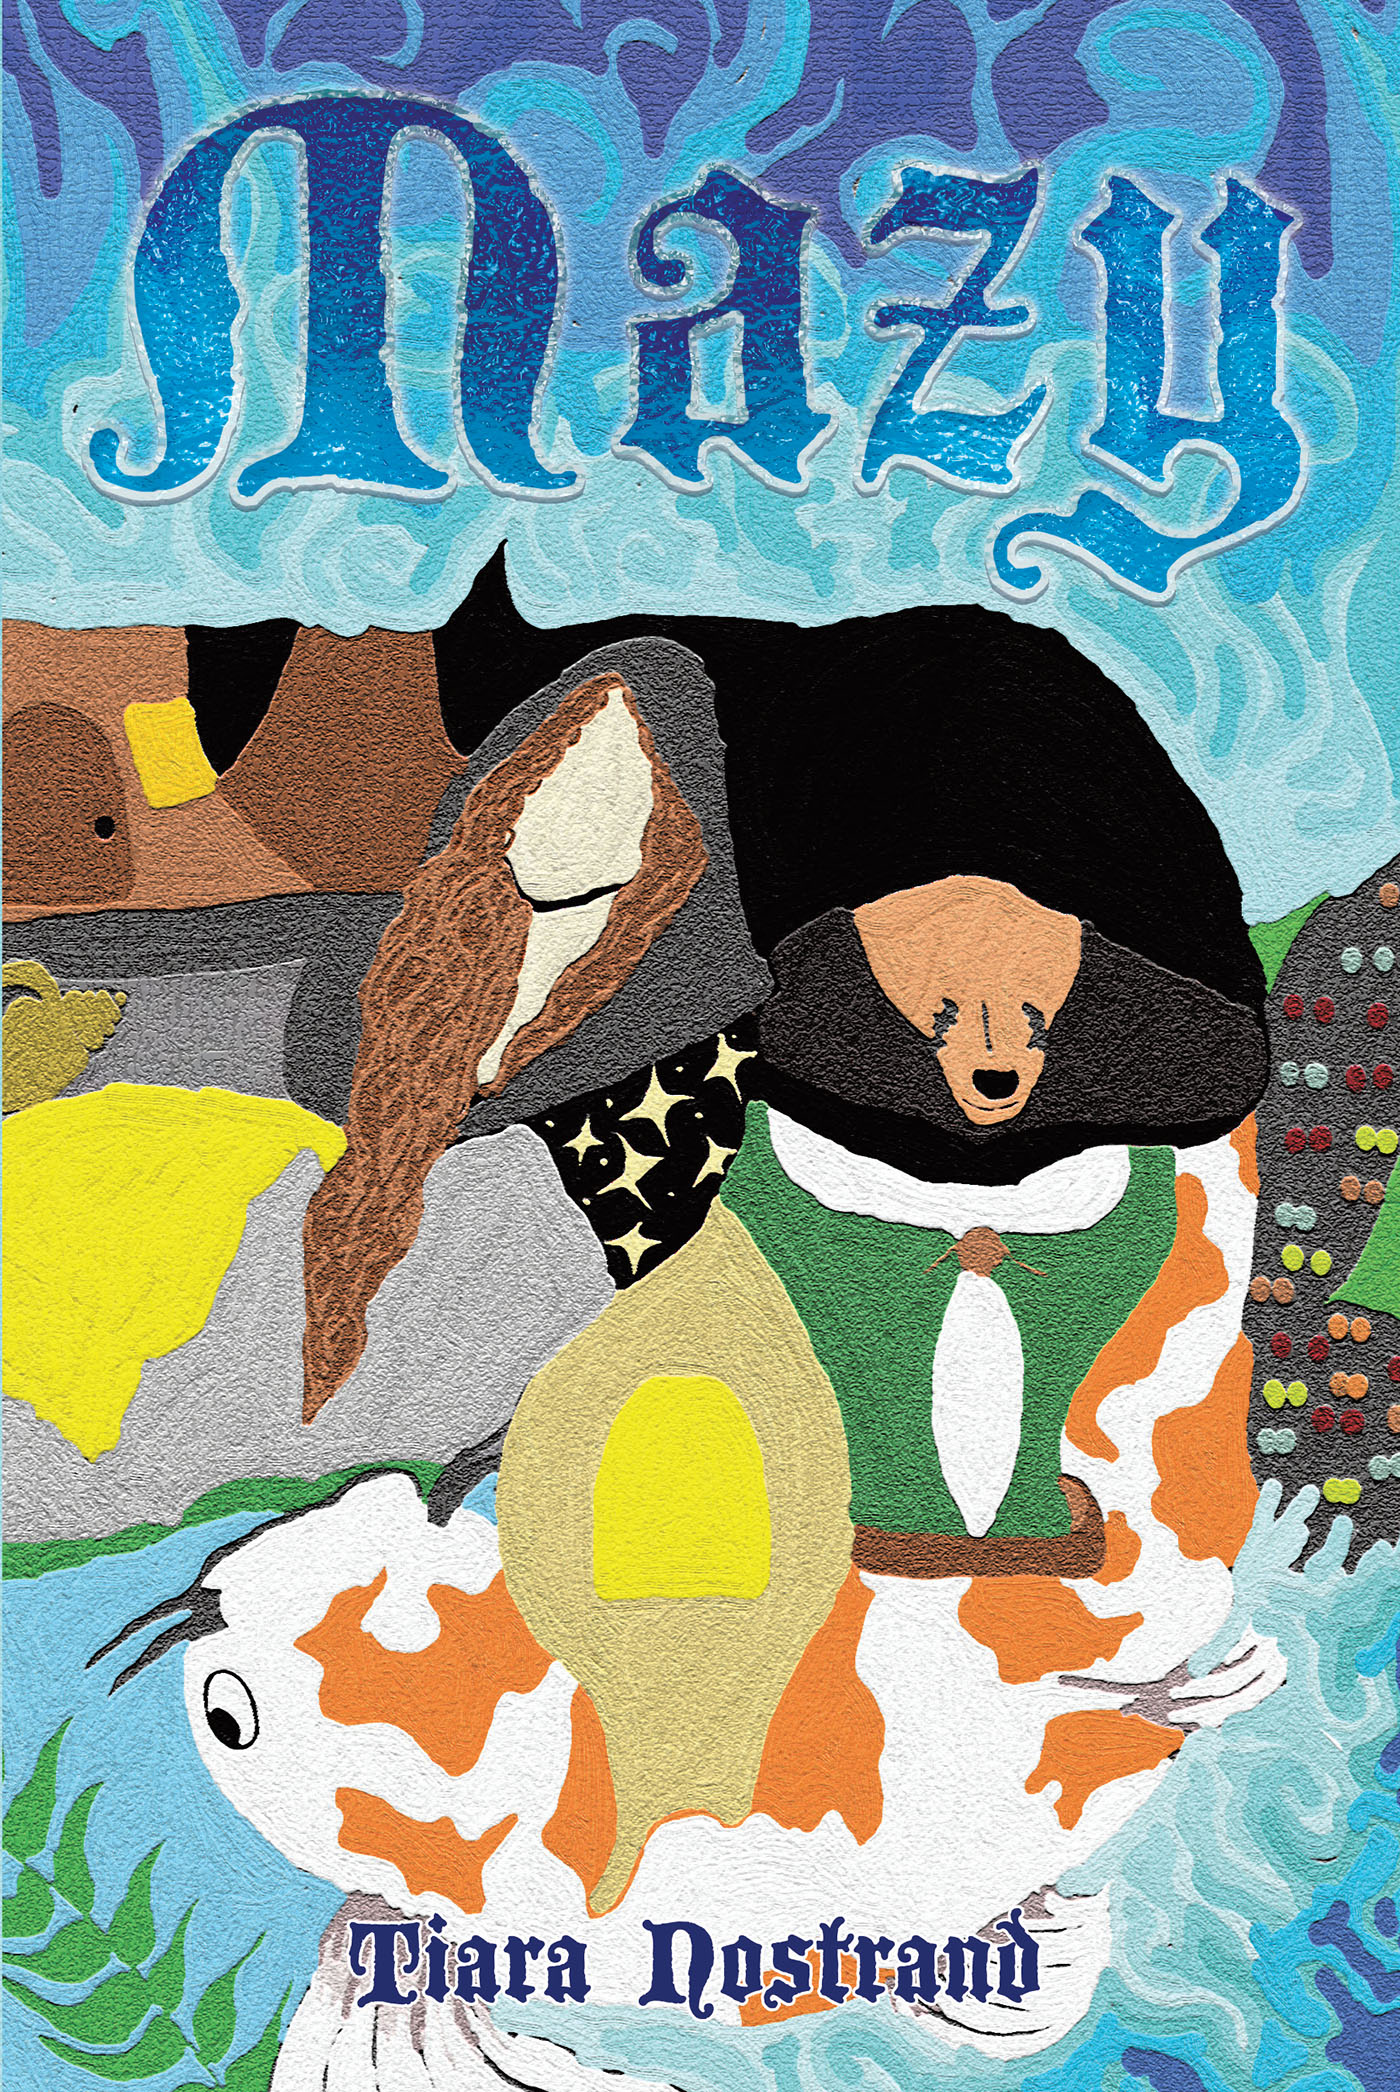 Mazy Cover Image